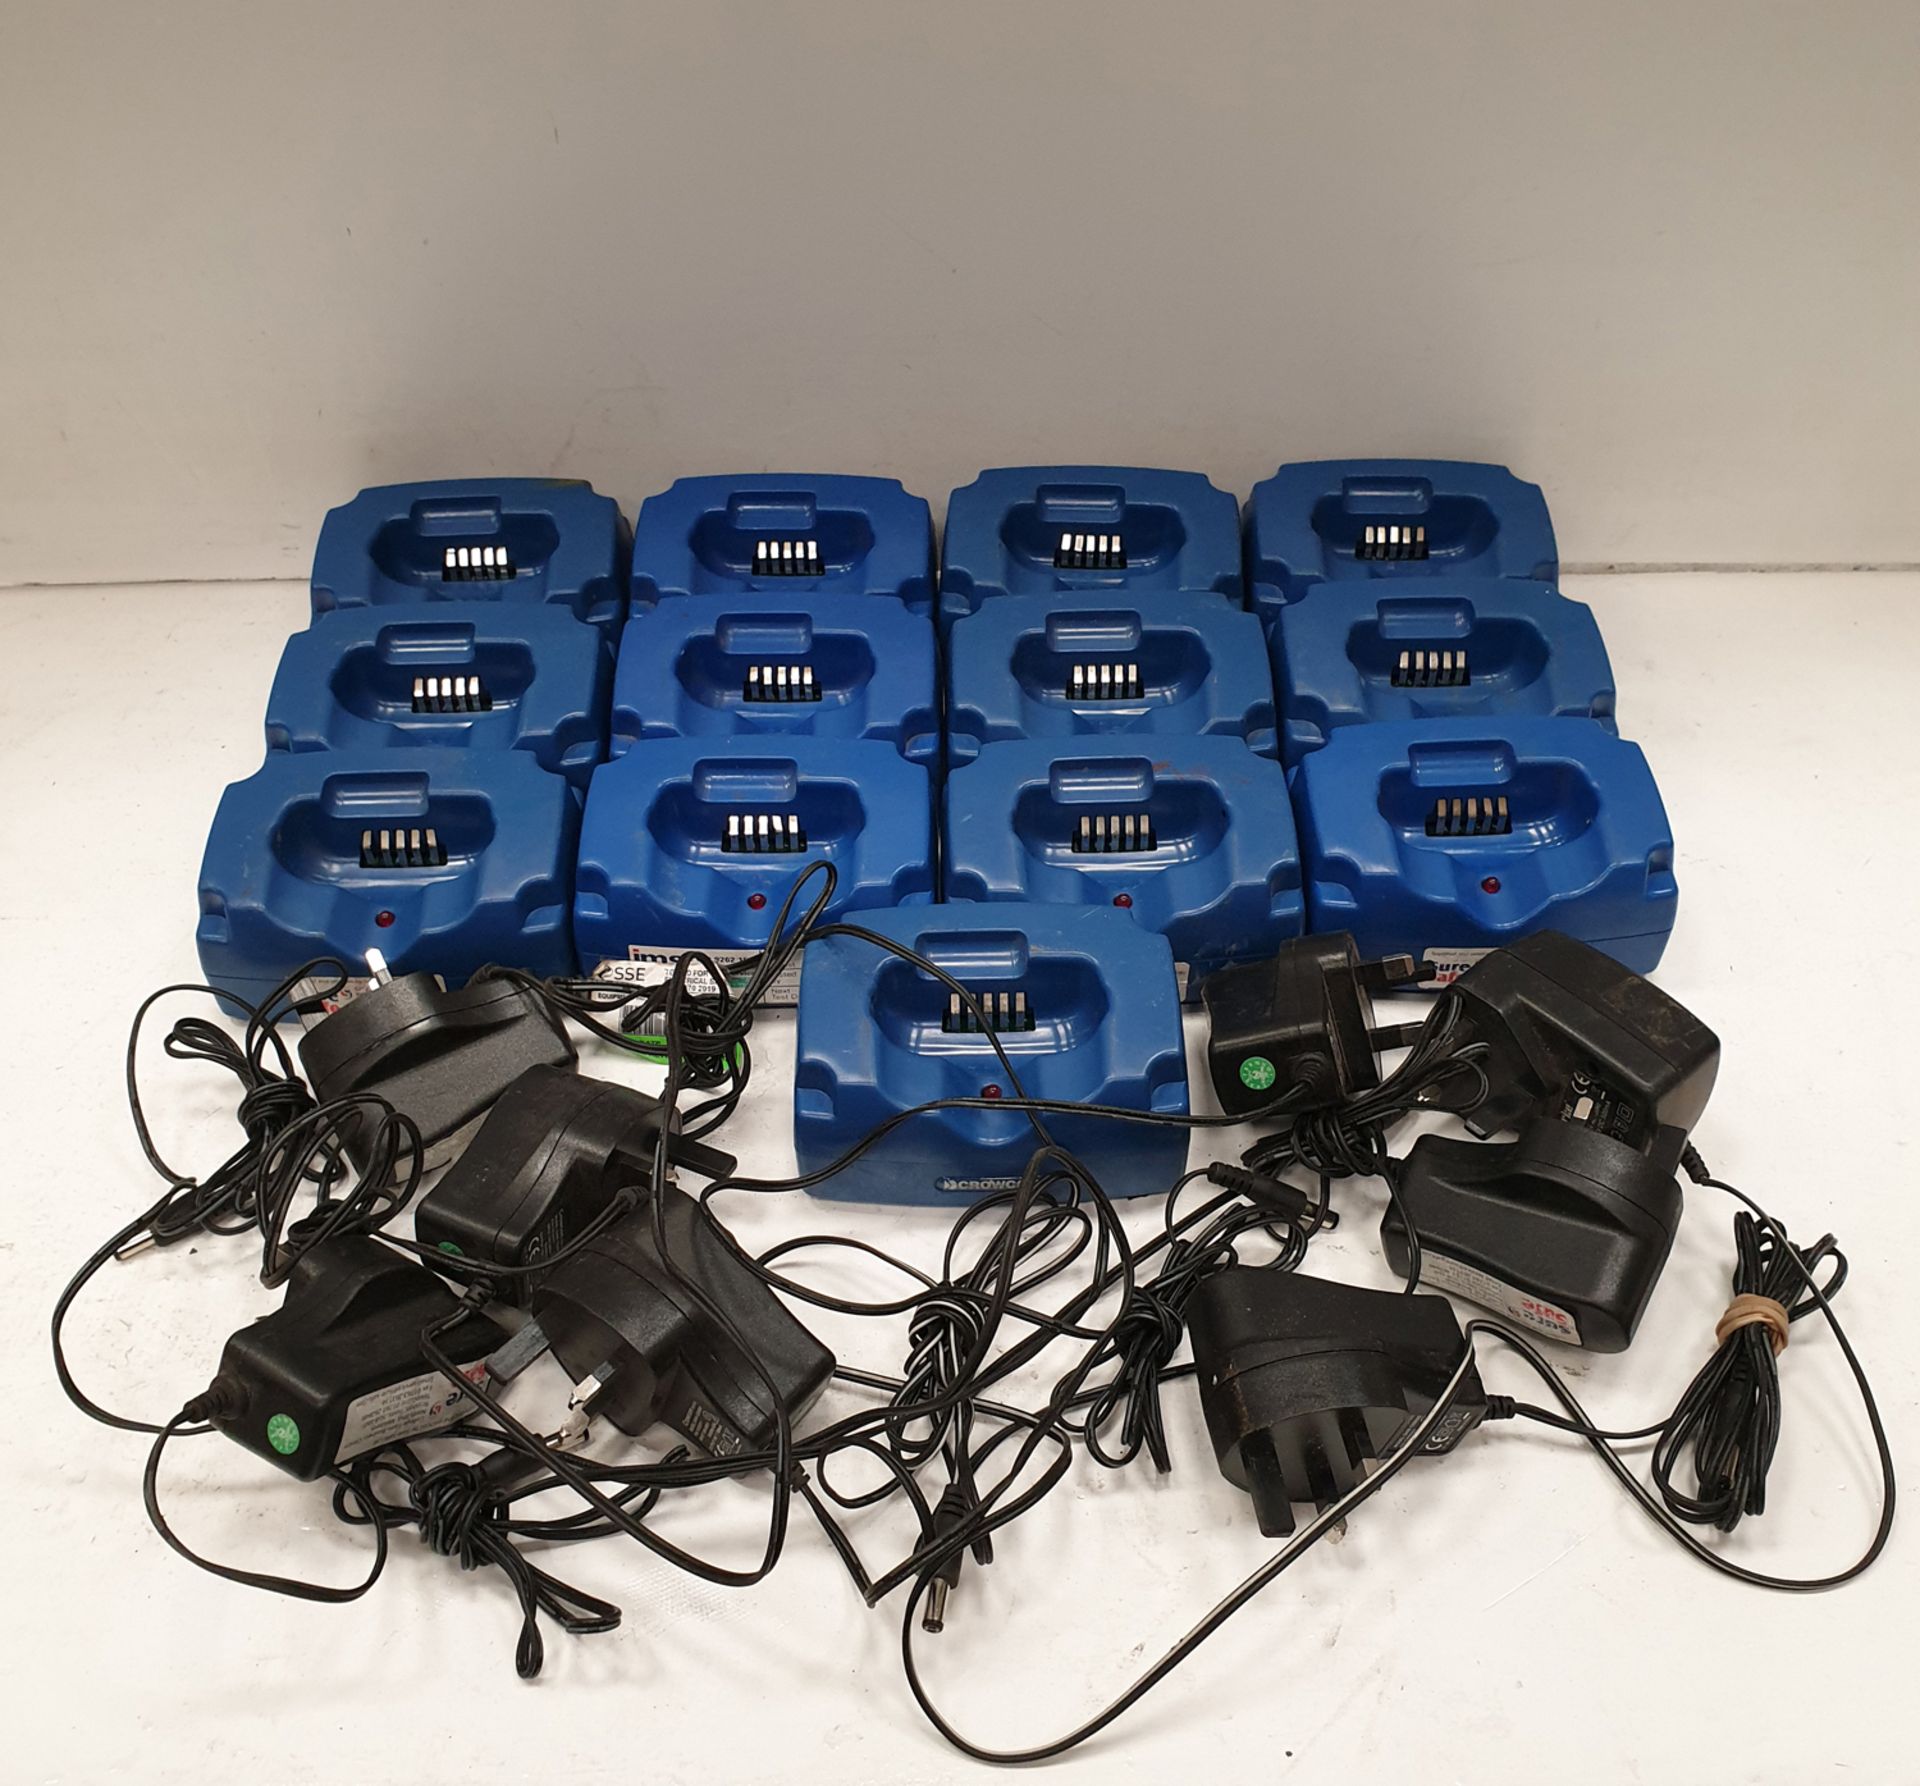 13 x CROWCON CO11018 Battery Chargers.